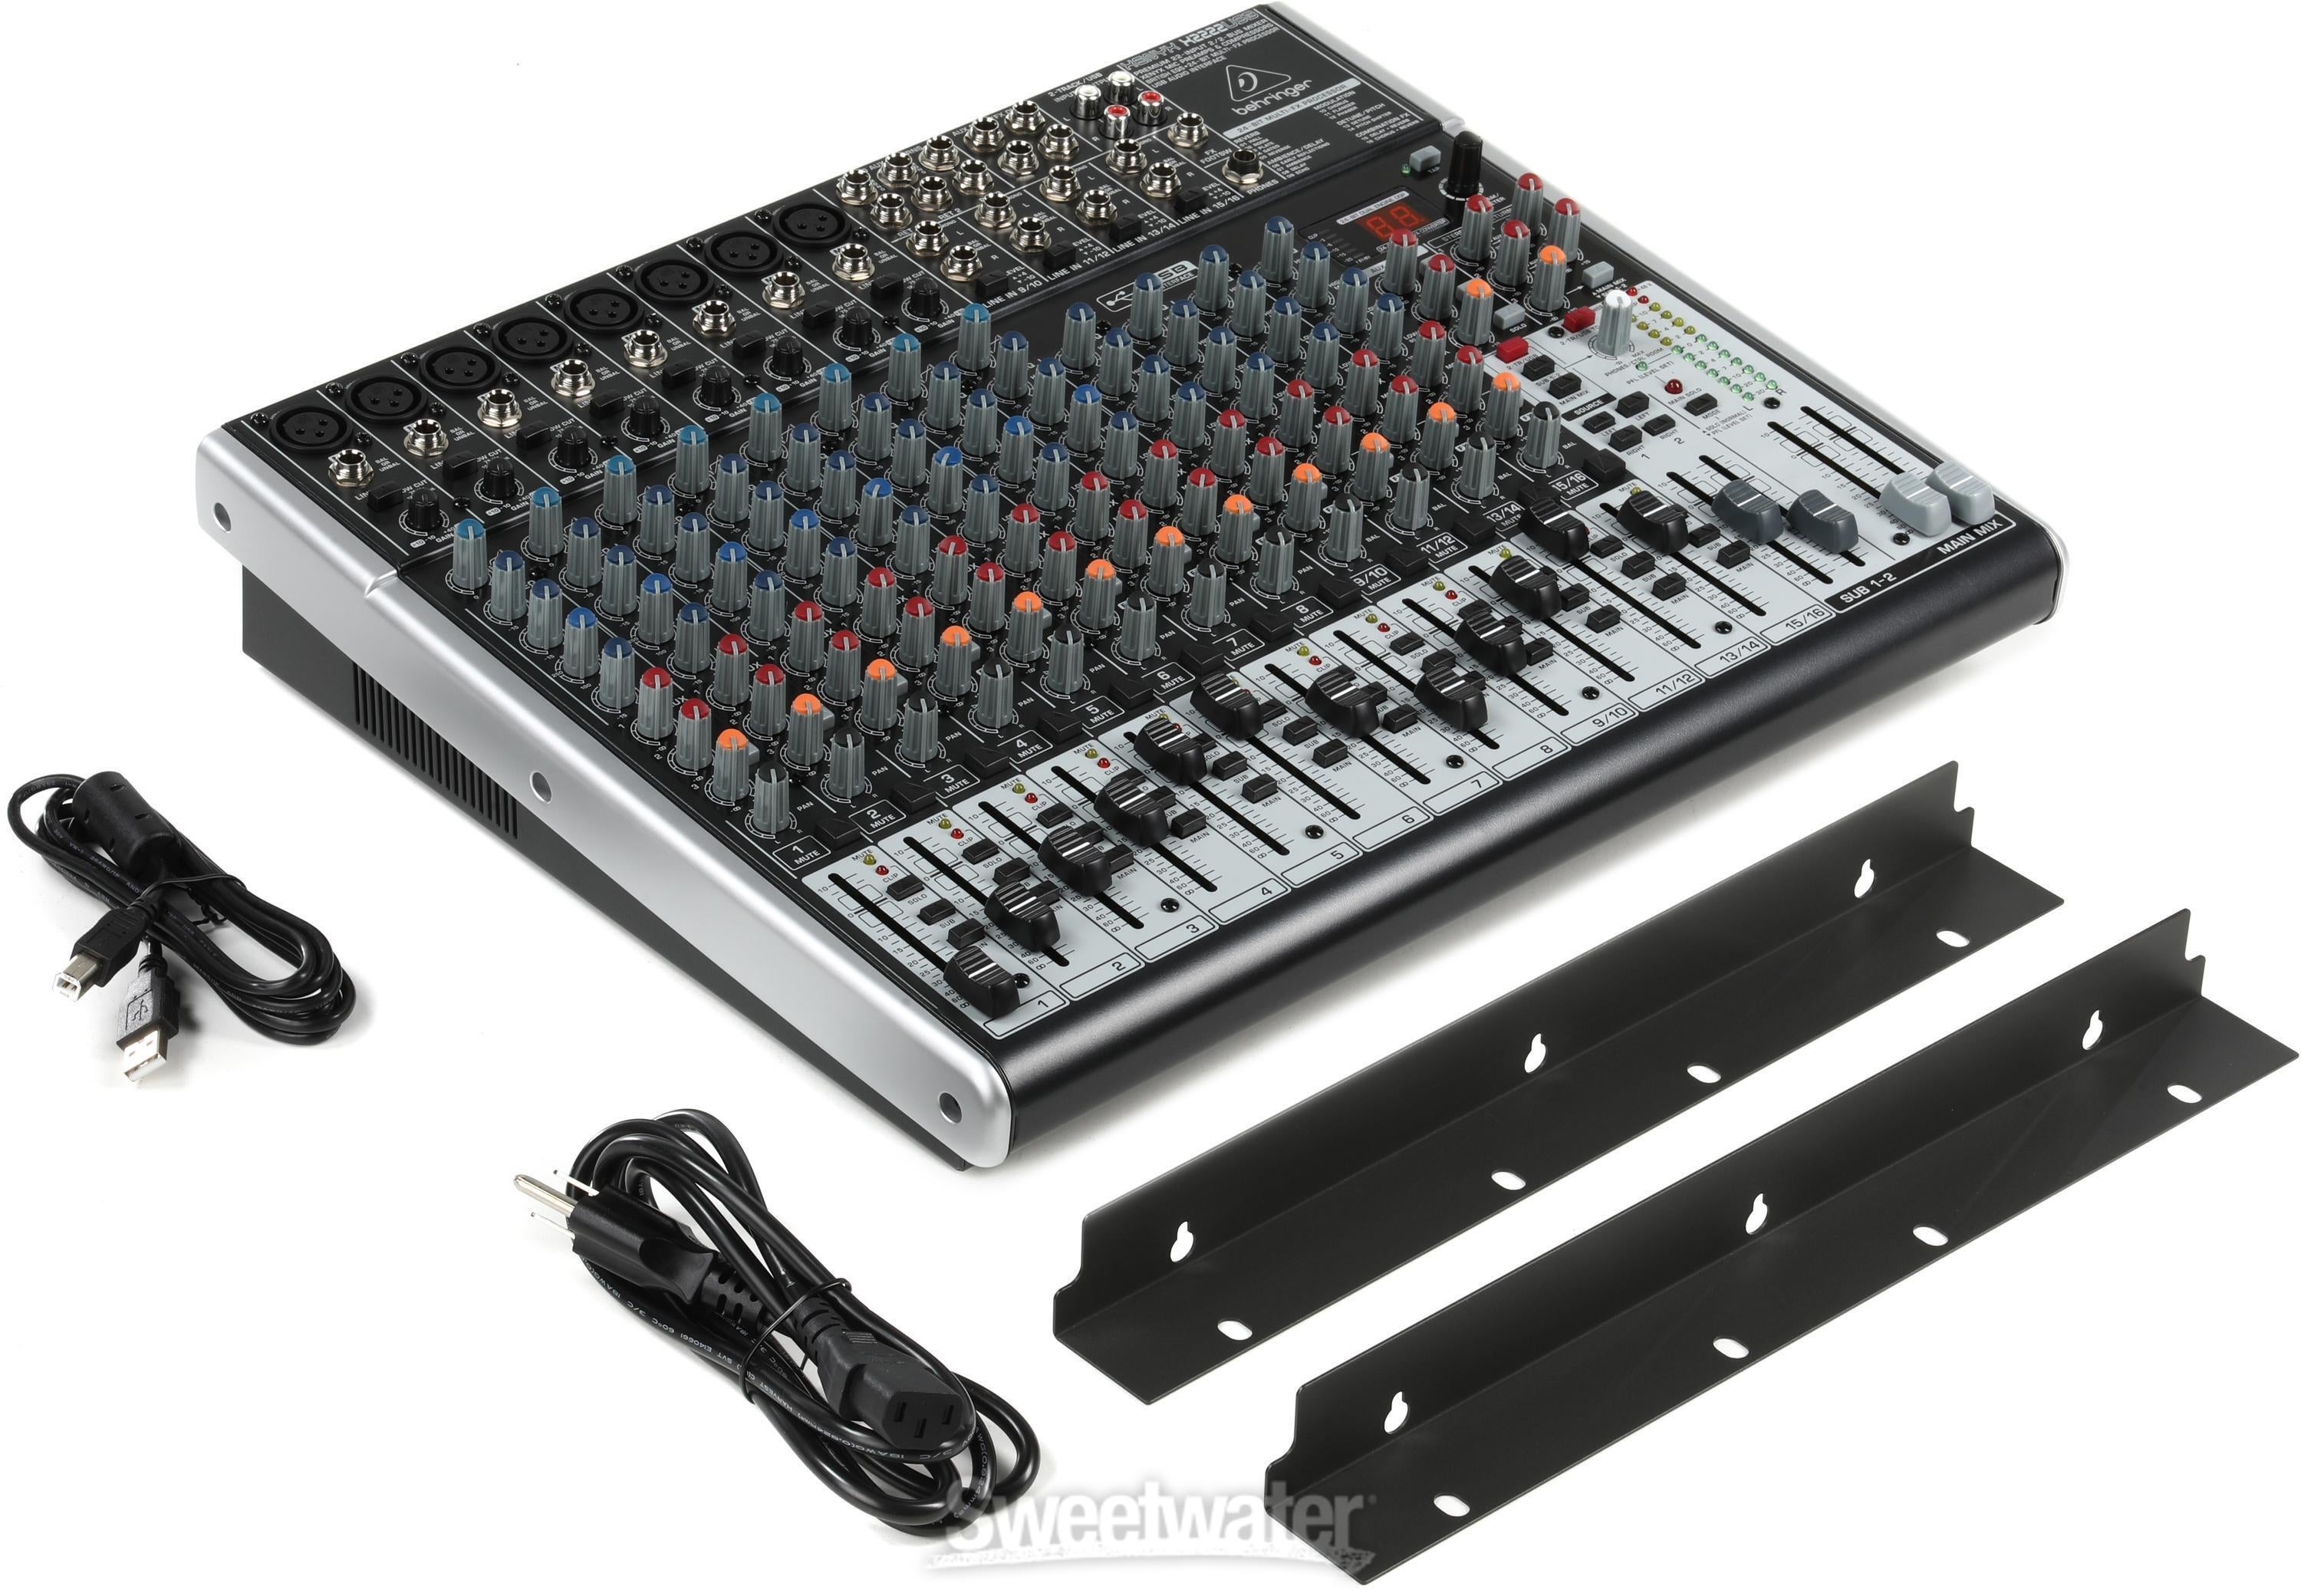 Behringer Xenyx X2222USB Mixer with USB and Effects | Sweetwater